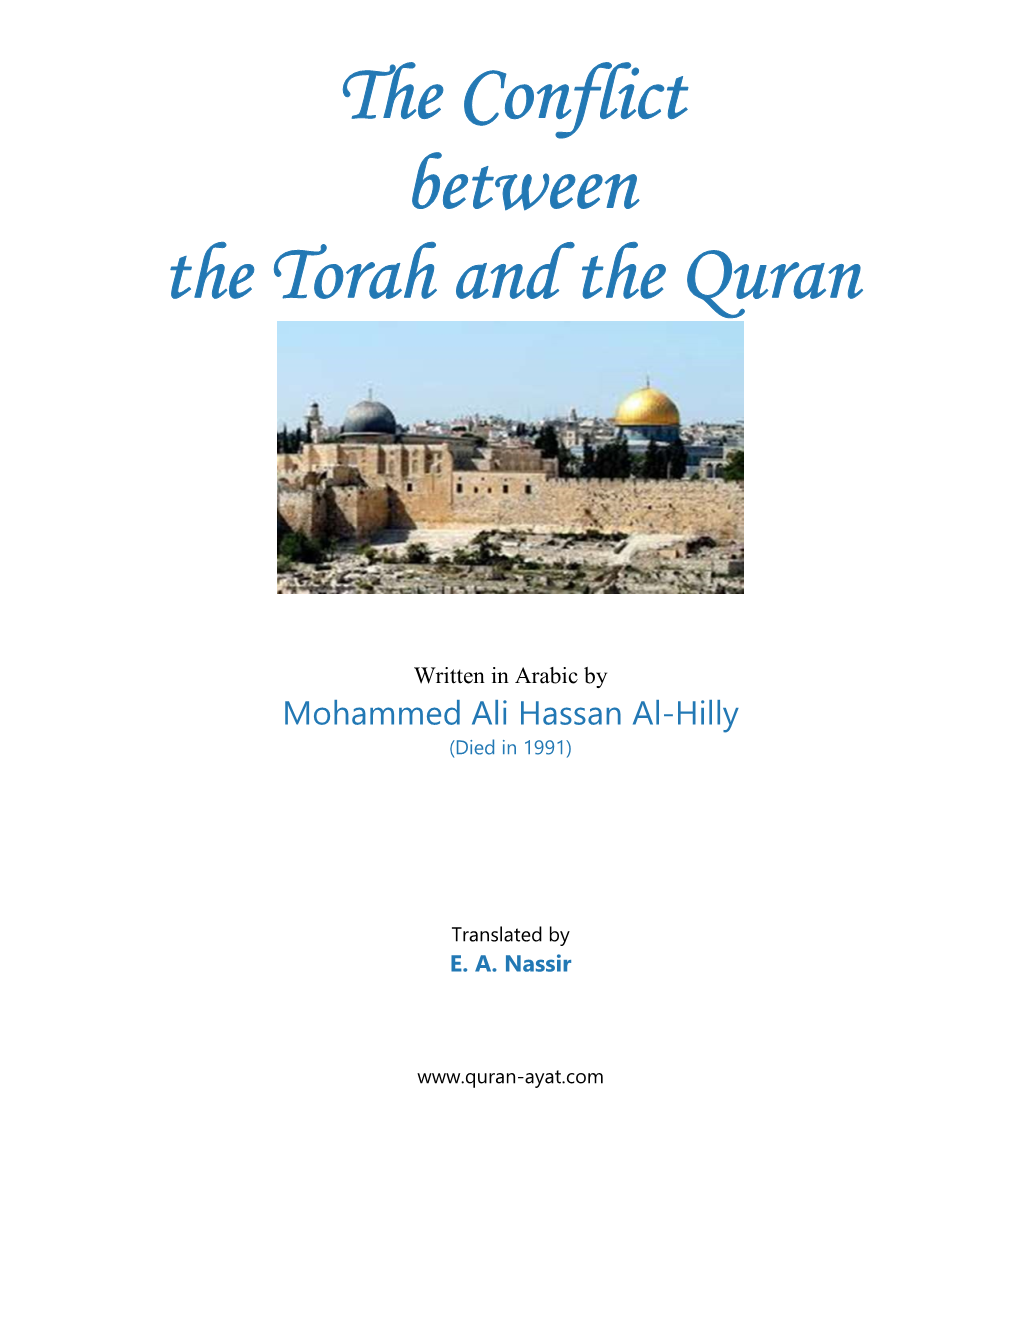 The Conflict Between the Torah and the Quran